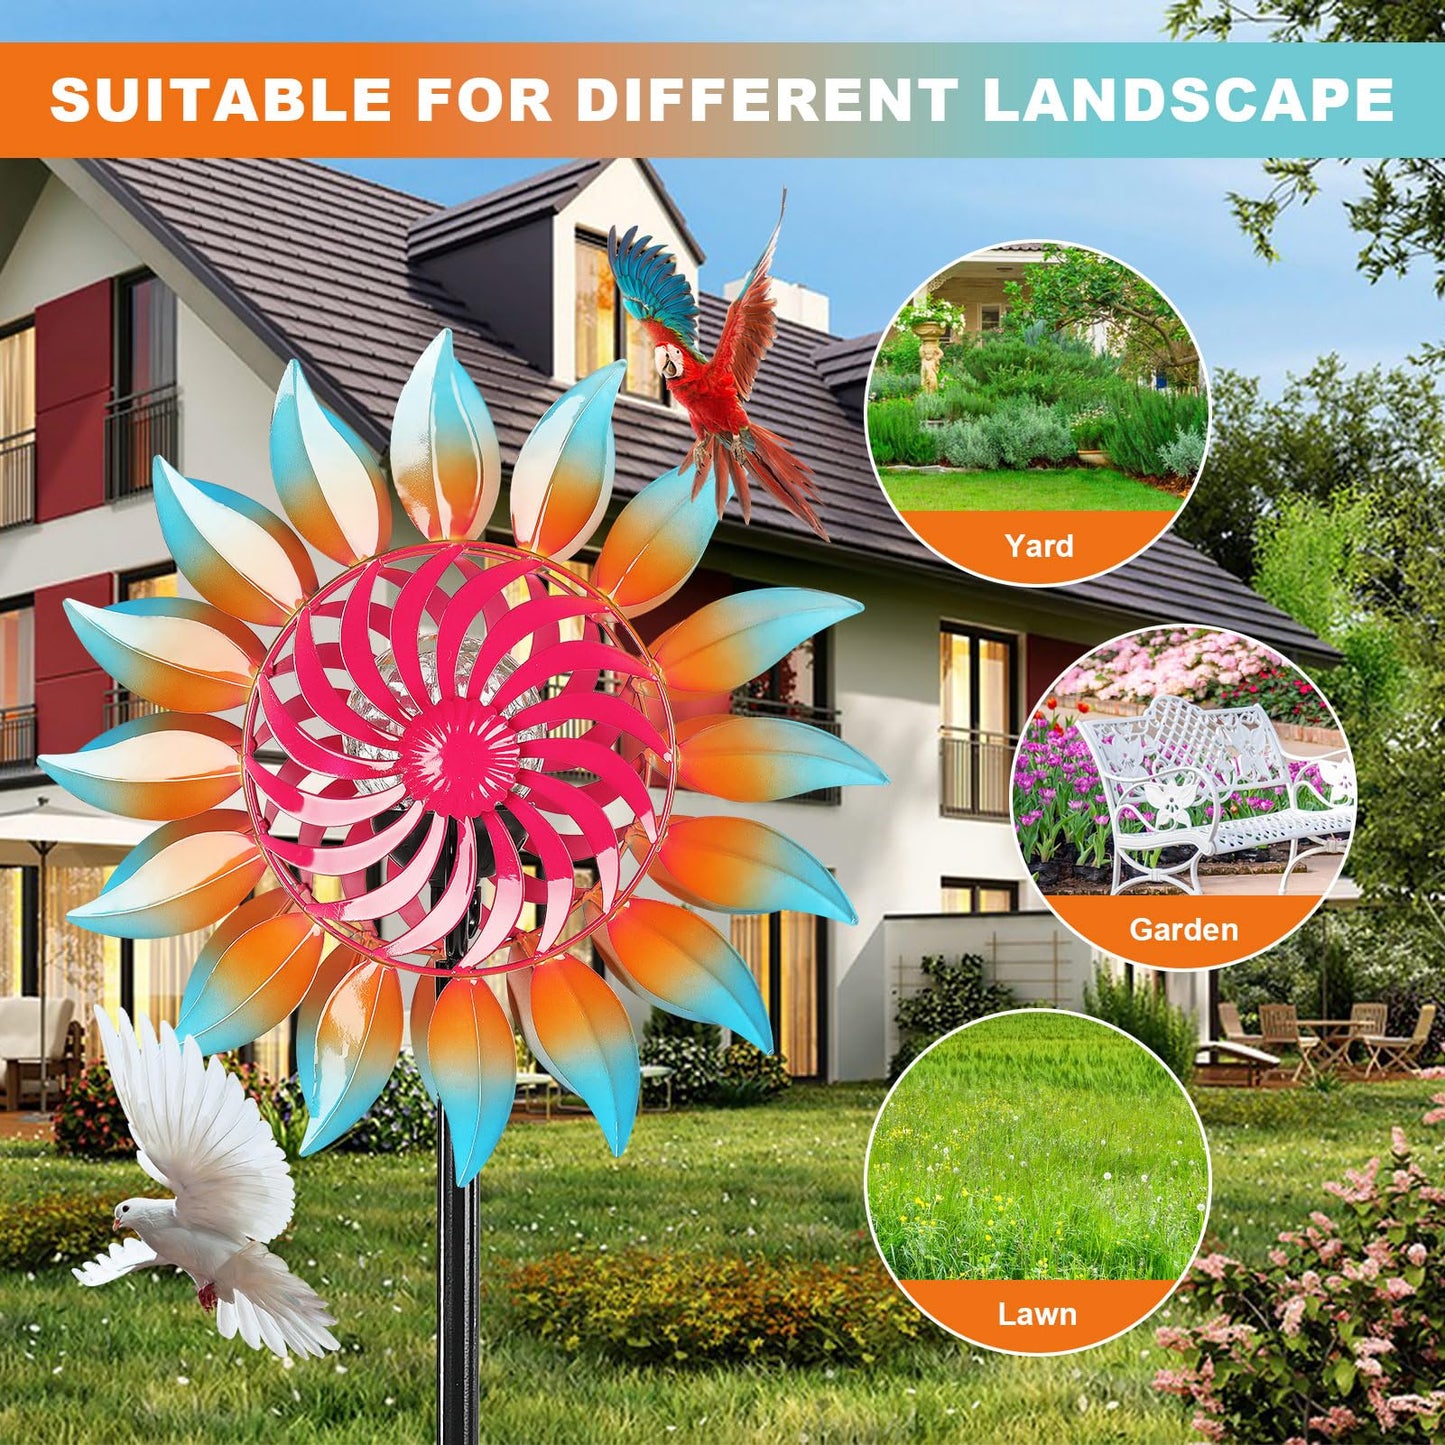 Solar Wind Spinner-Wind Spinners for Yard and Garden Metal Yard Art Kinetic Wind Spinner 75 in with Solar Powered Glass Ball for Yard Garden Backyard Lawn Decorations